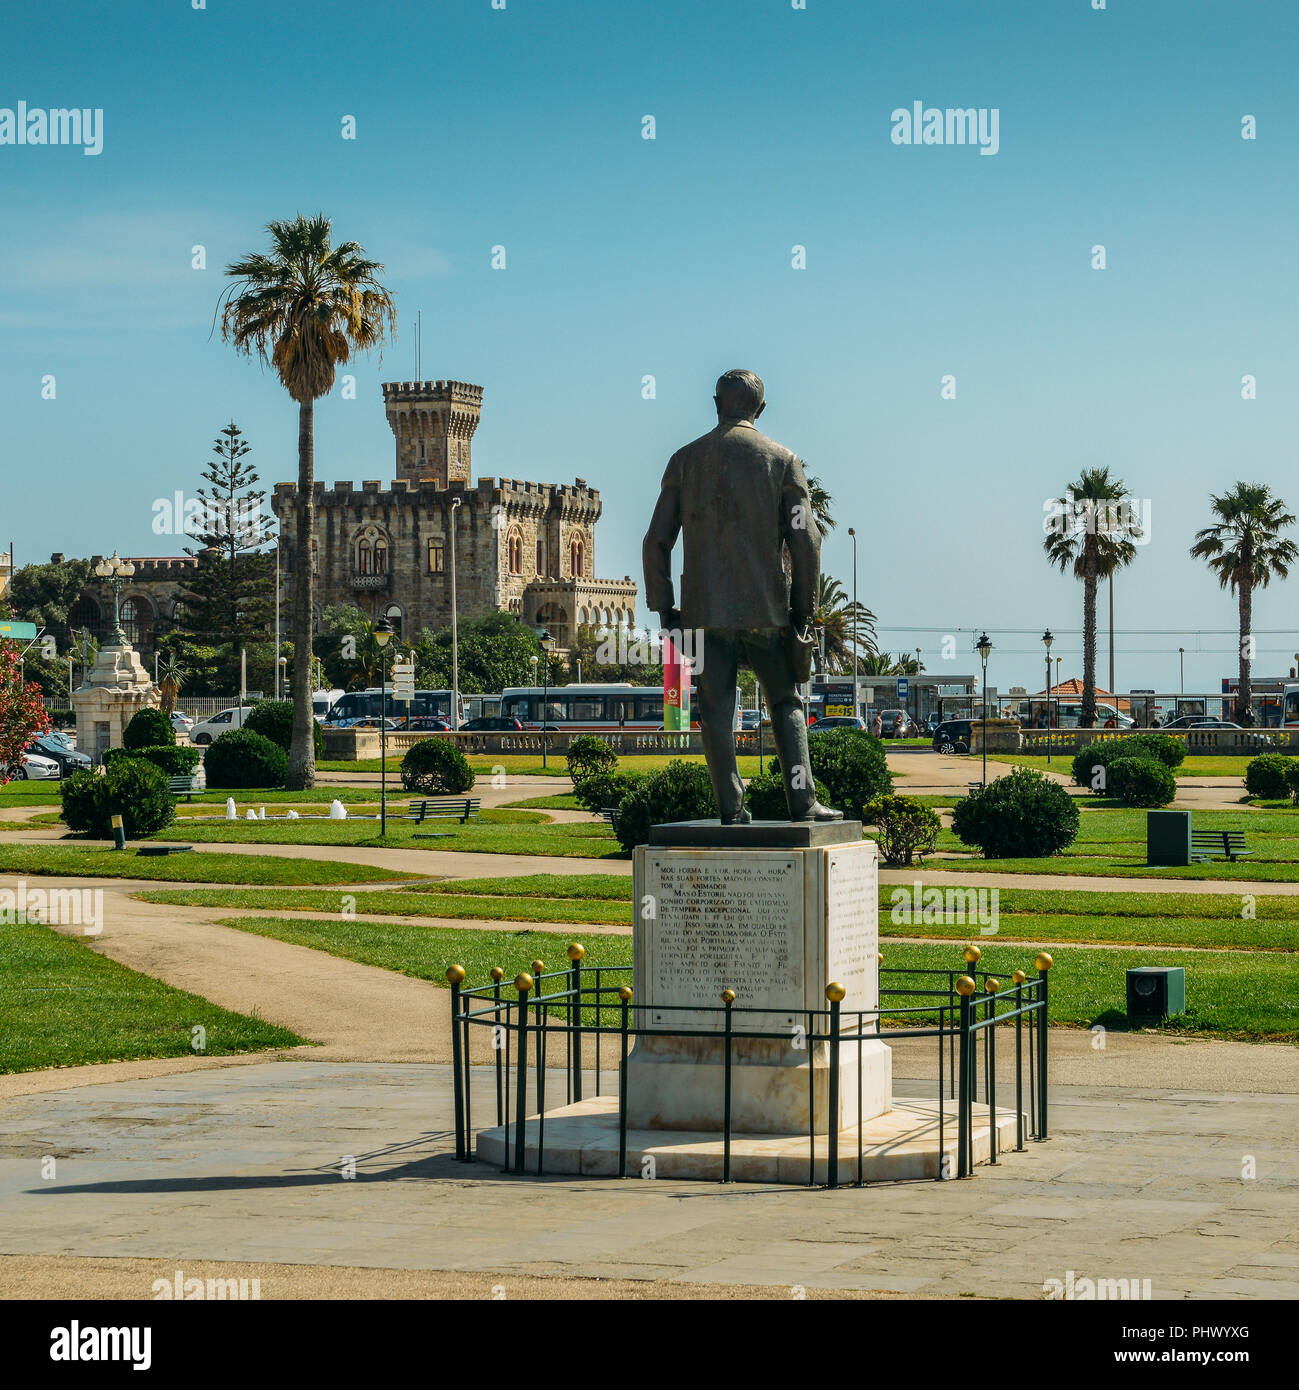 Estoril, Portugal - August 30, 2018: Statue of Fausto Cardoso and Baronial Estoril Castle in background overlooking the ocean Stock Photo